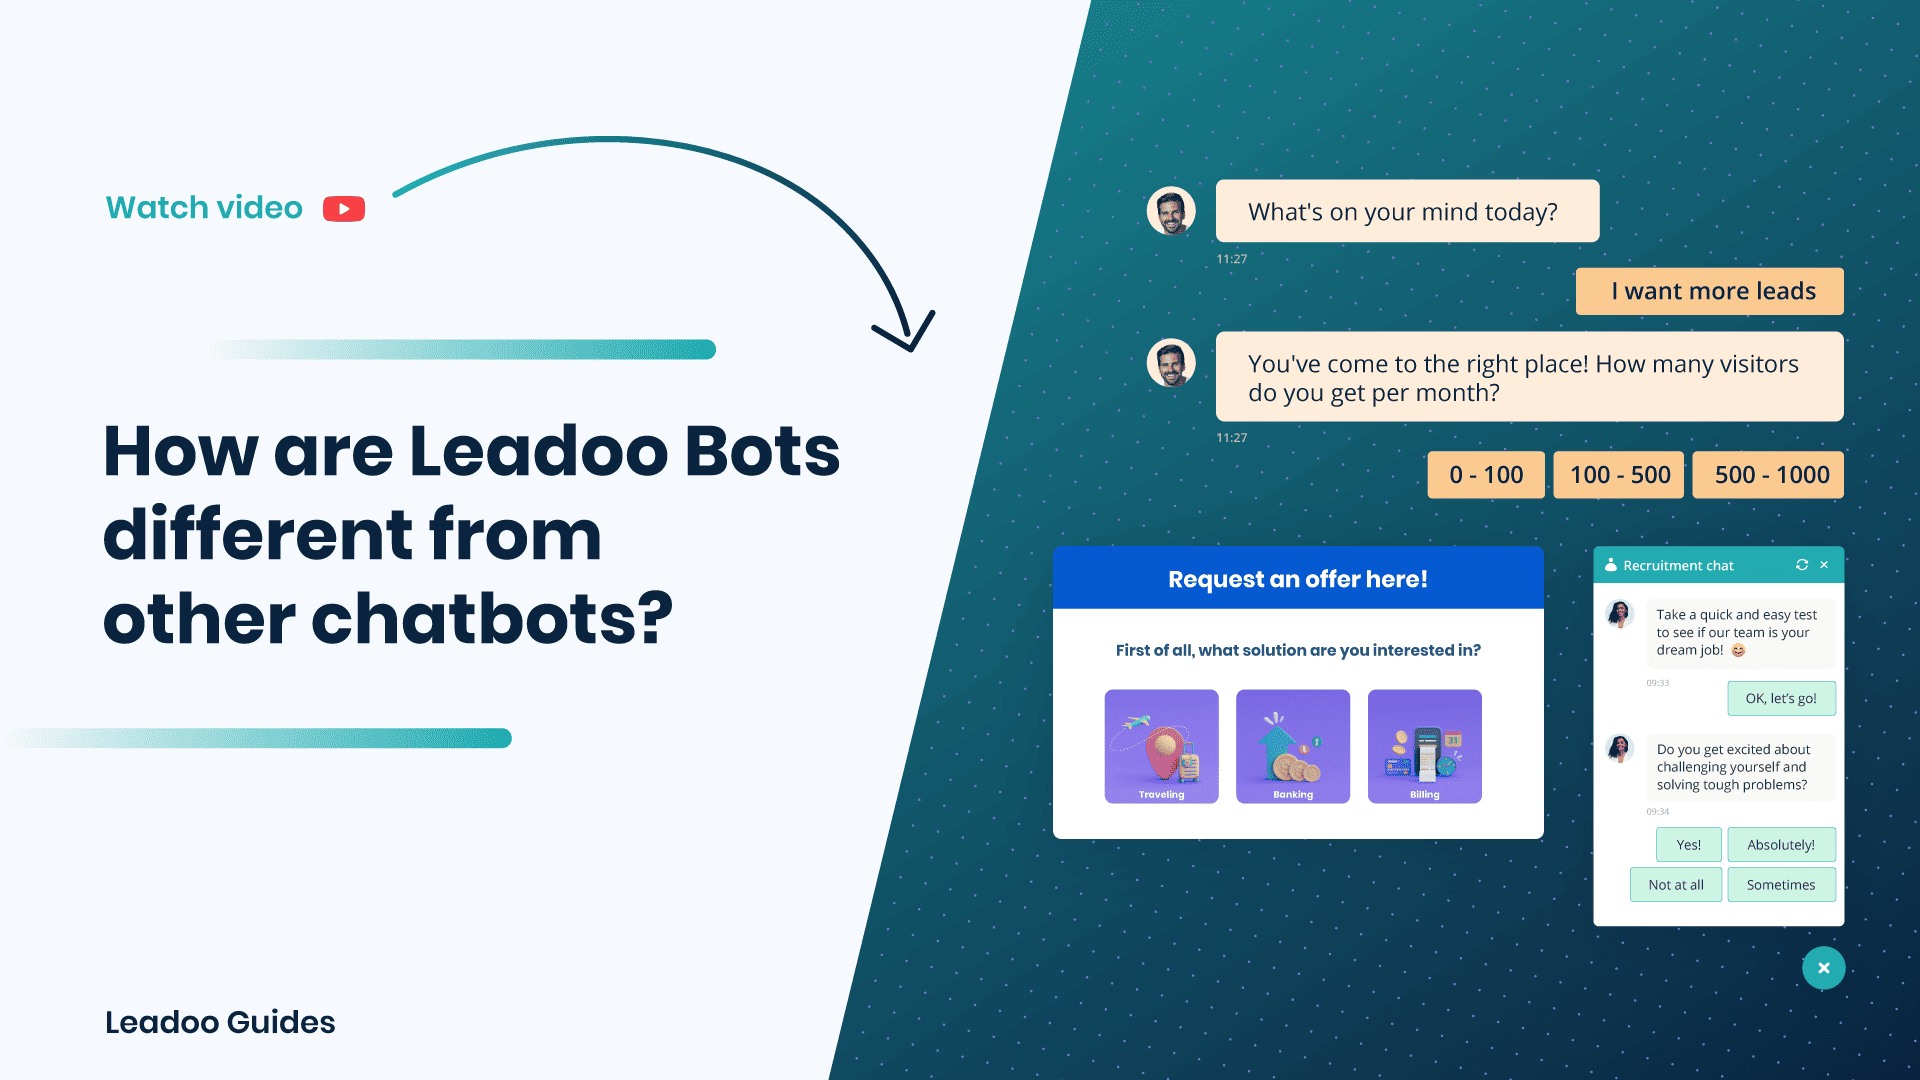 Leadoo Bots different from other chatbots leadoo vs other chatbots How are Leadoo Bots different from other chatbots?